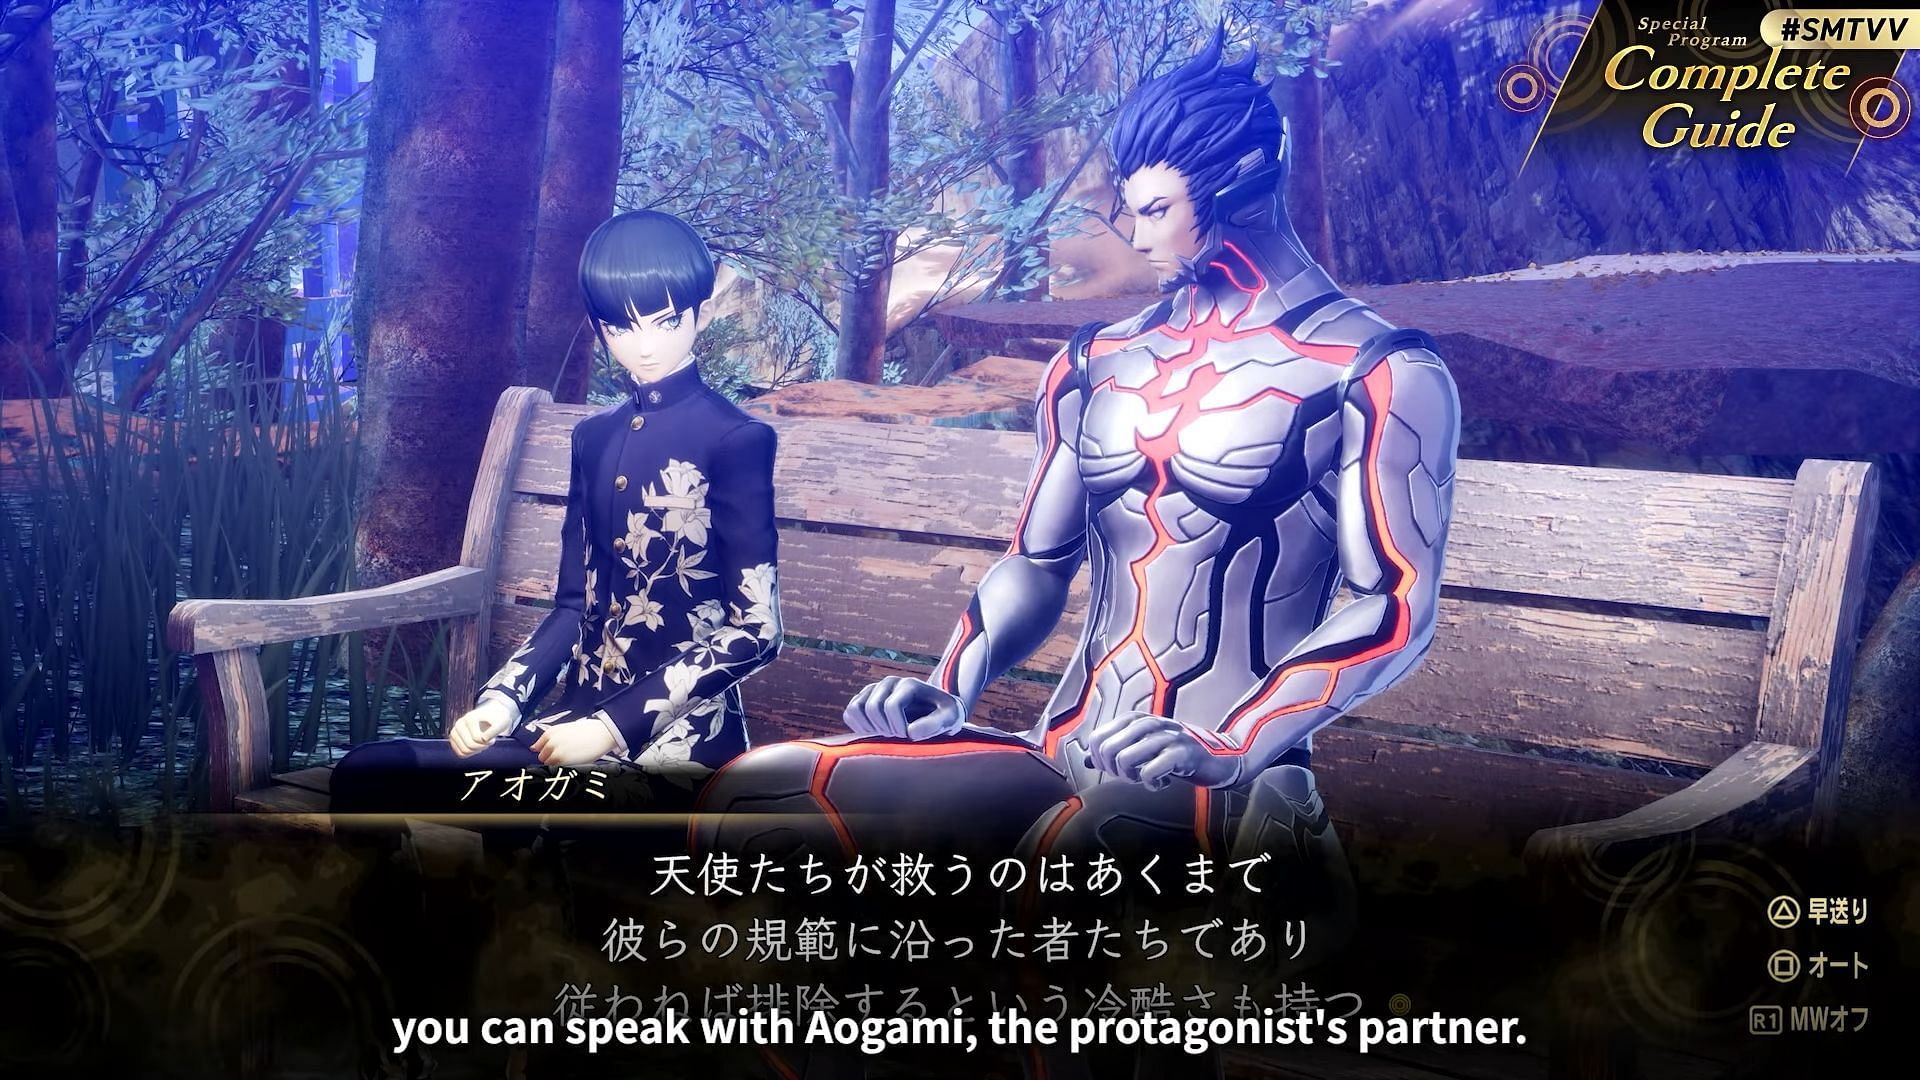 Nahobino can converse with Demons and companions in certain places. (Image via ATLUS)